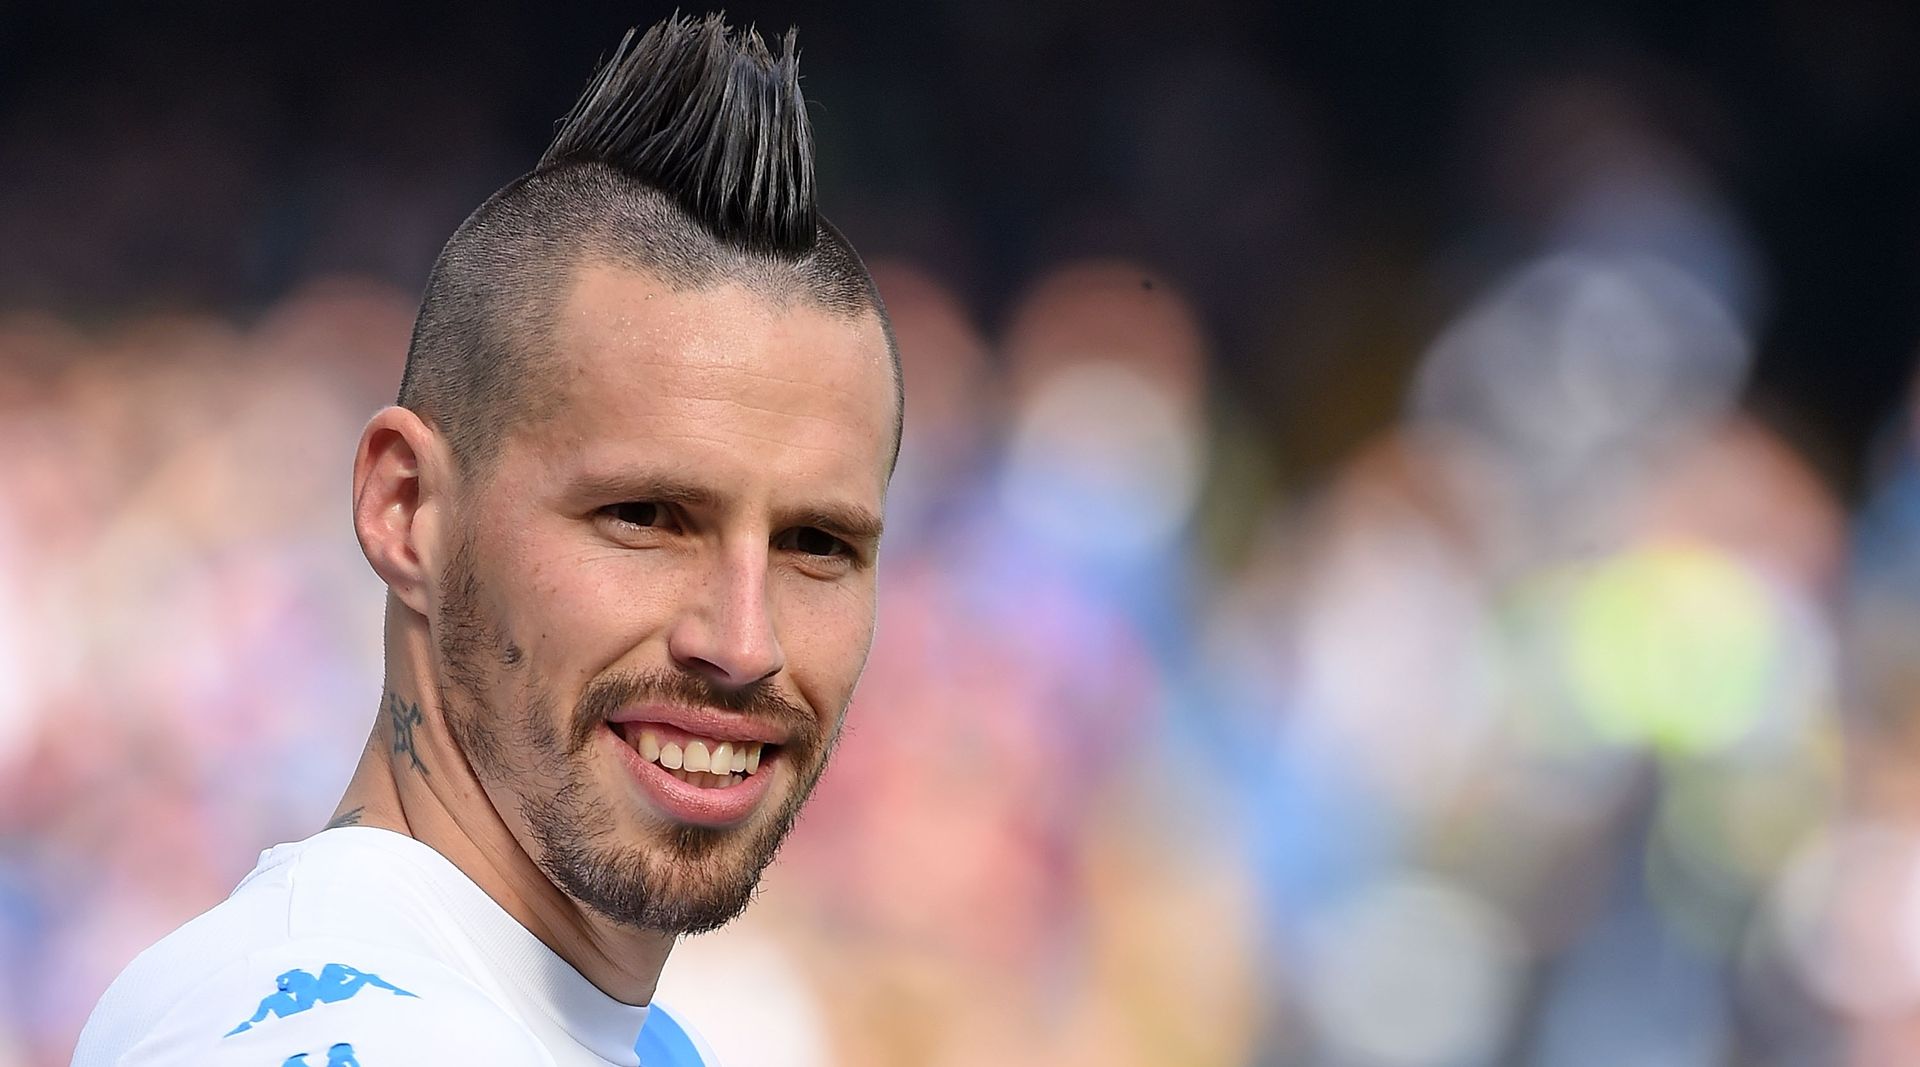 <p>                     Sporting an almighty mohawk, Marek Hamsik dazzled in a multitude of midfield roles for Napoli for more than a decade.                   </p>                                      <p>                     Slovakia’s best player of all time, Hamsik scored 100 goals in just over 400 Serie A appearances for the Partenopei – with most of those coming between 2010 and 2019 – where he assumed the captaincy in 2014.                   </p>